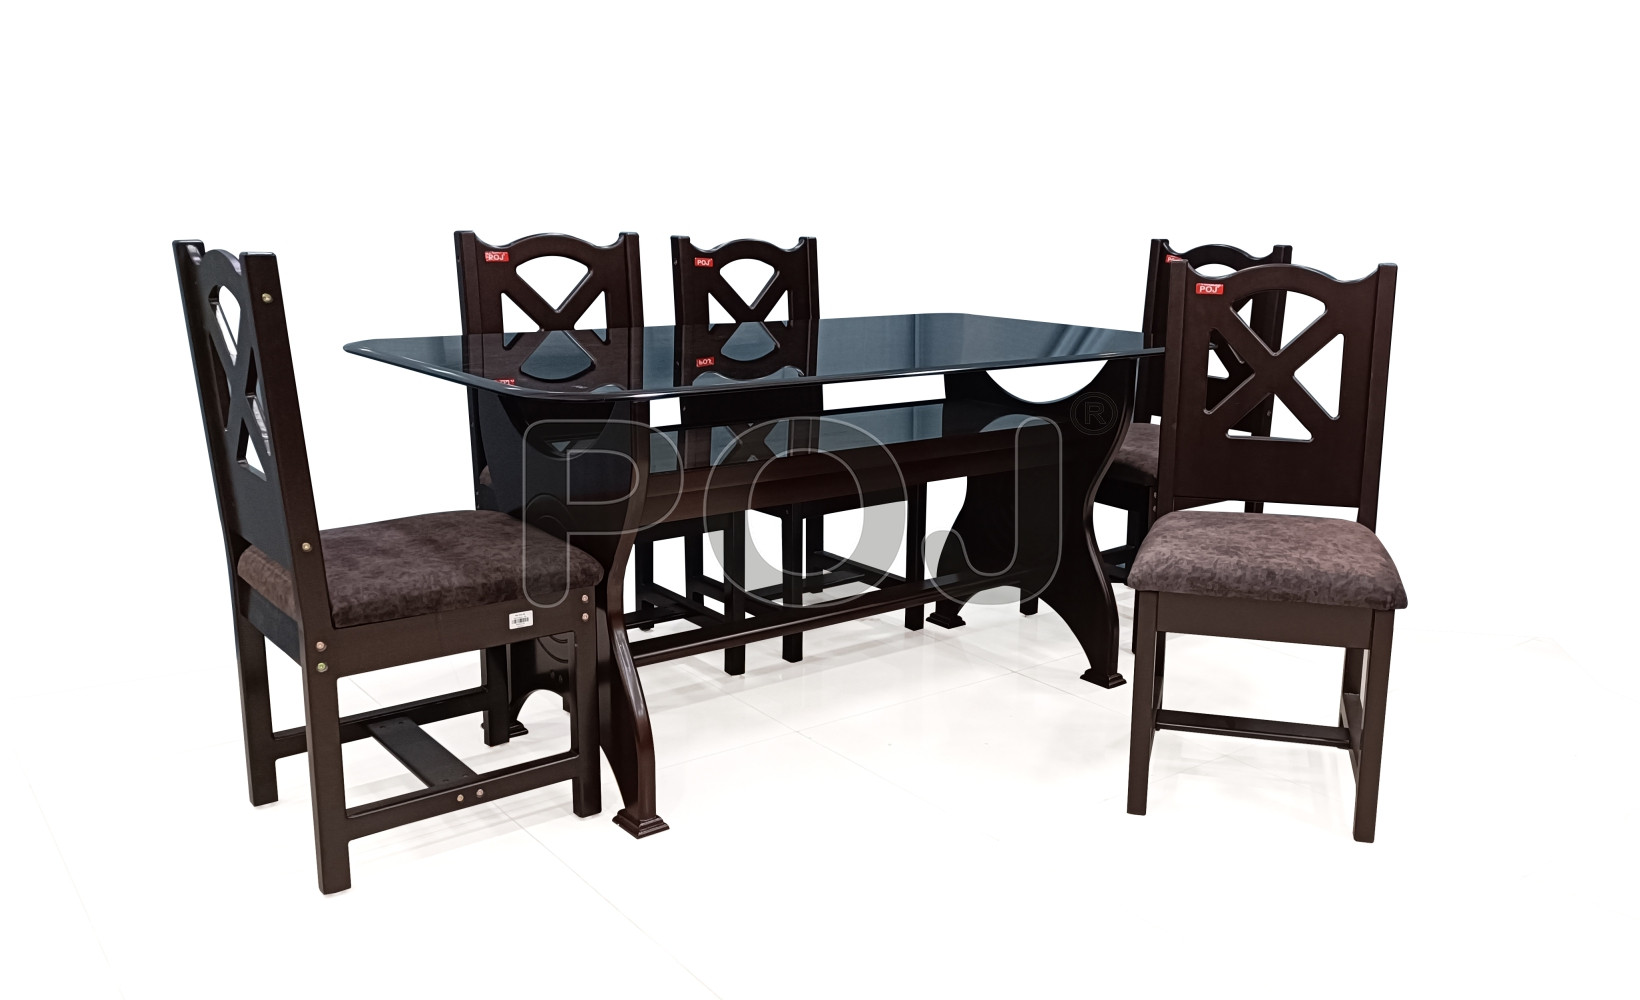 Miso 6 Seater Dining Table With Glass On Top